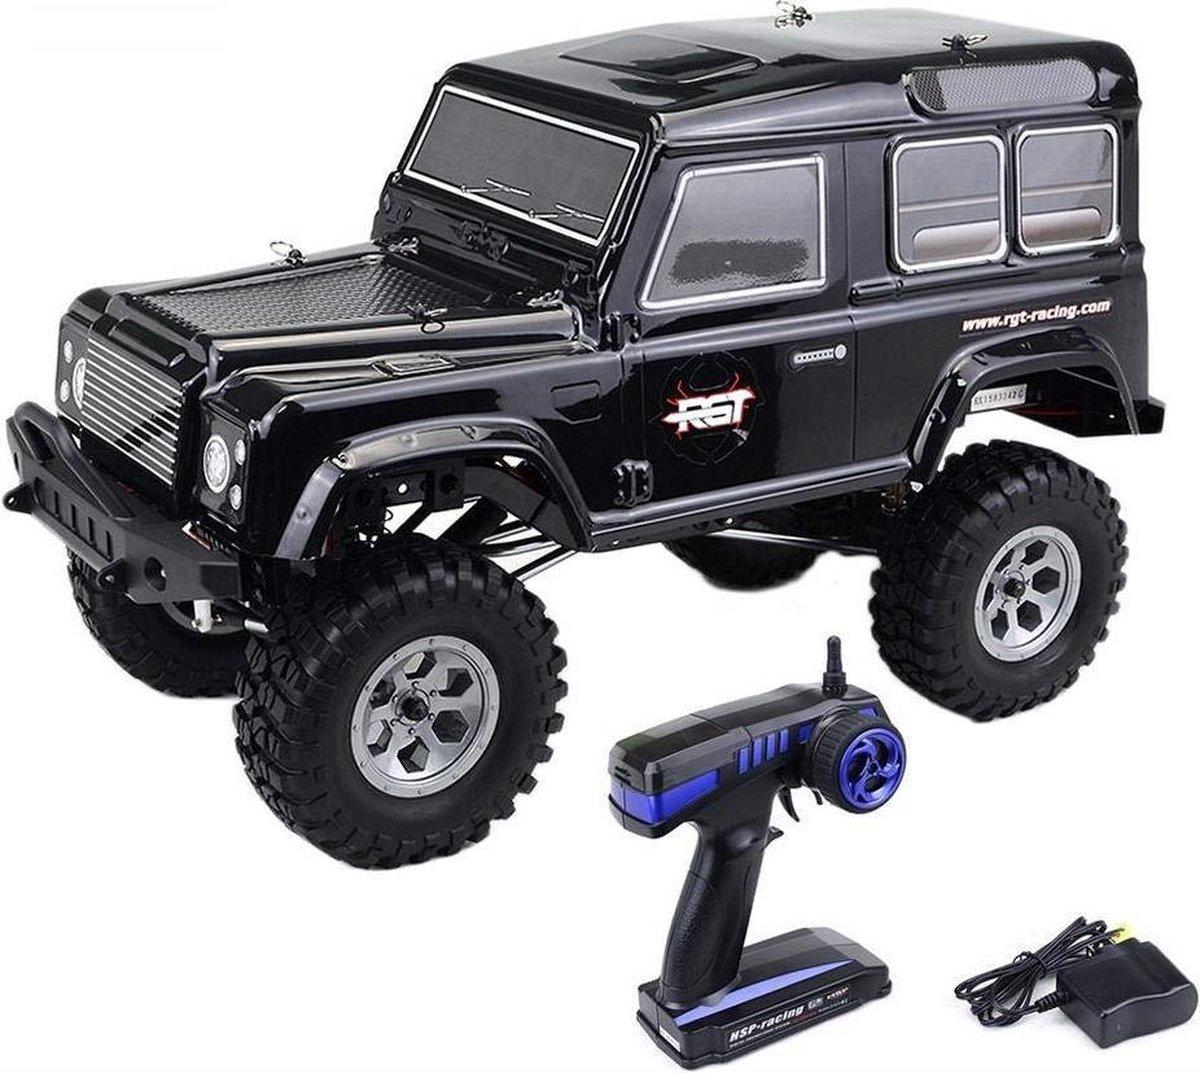 Rgt Rock Crawler: RGT Crawler: Superior Features for Ultimate Off-Roading Experience